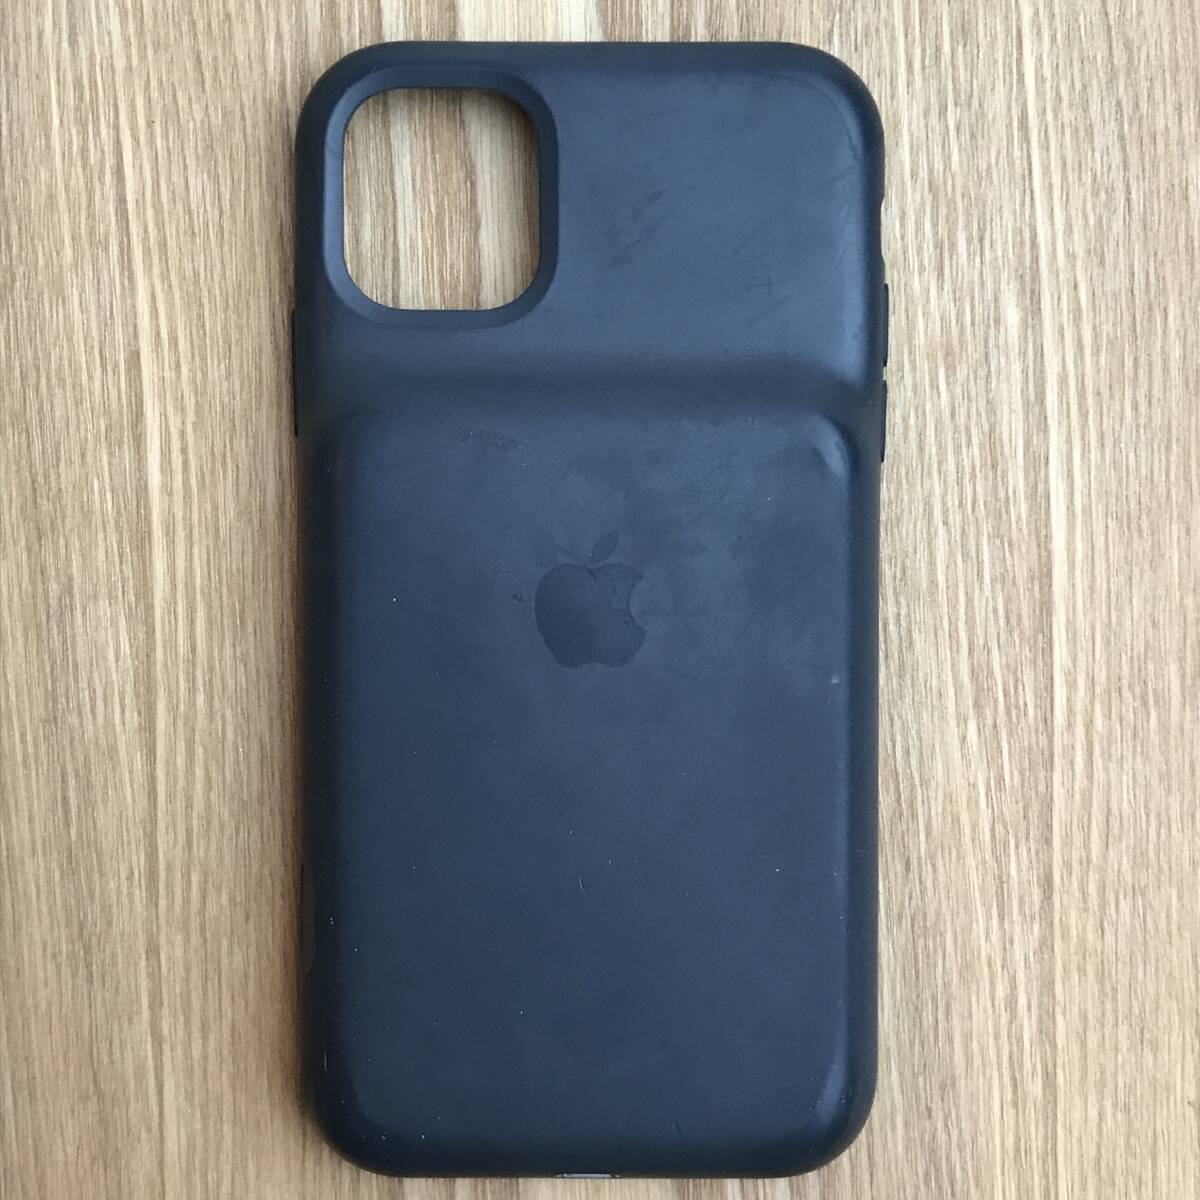 APPLE純正 iPhone 11 Smart Battery Case with Wireless Charging スマートバッテリーケース ワイヤレスチャージング ブラックの画像2